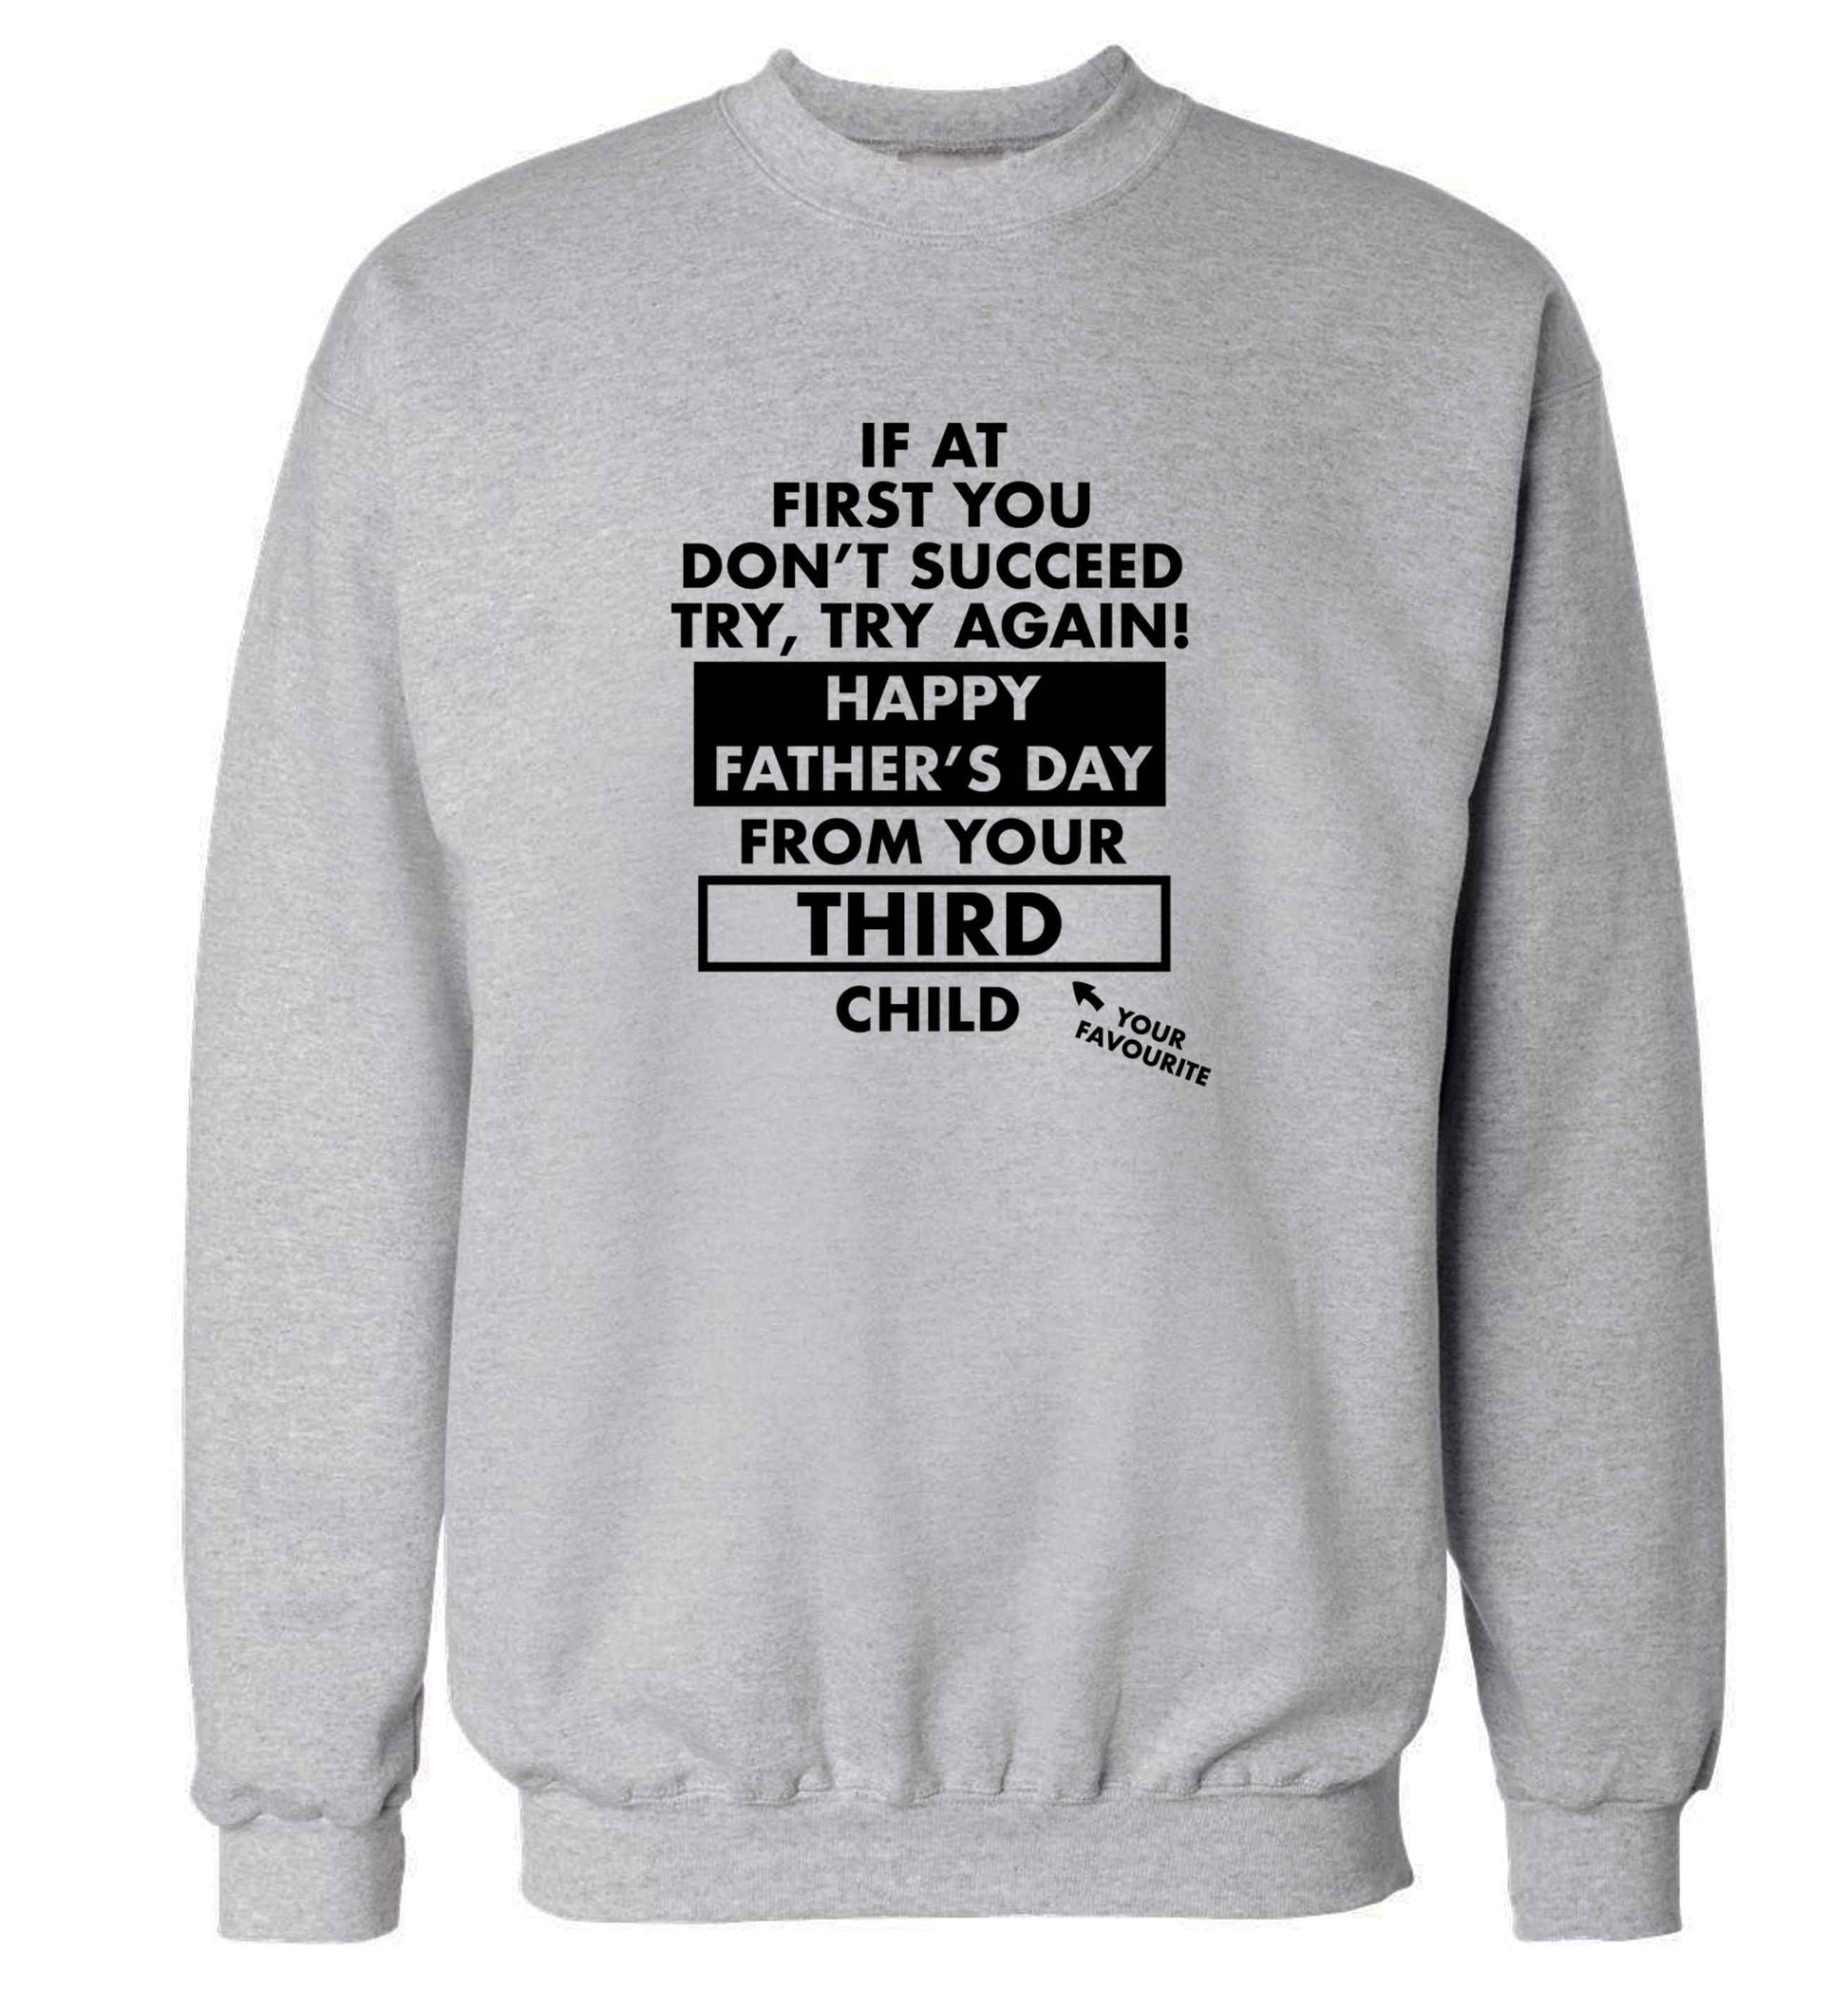 If at first you don't succeed try, try again Happy Father's day from your third child! adult's unisex grey sweater 2XL